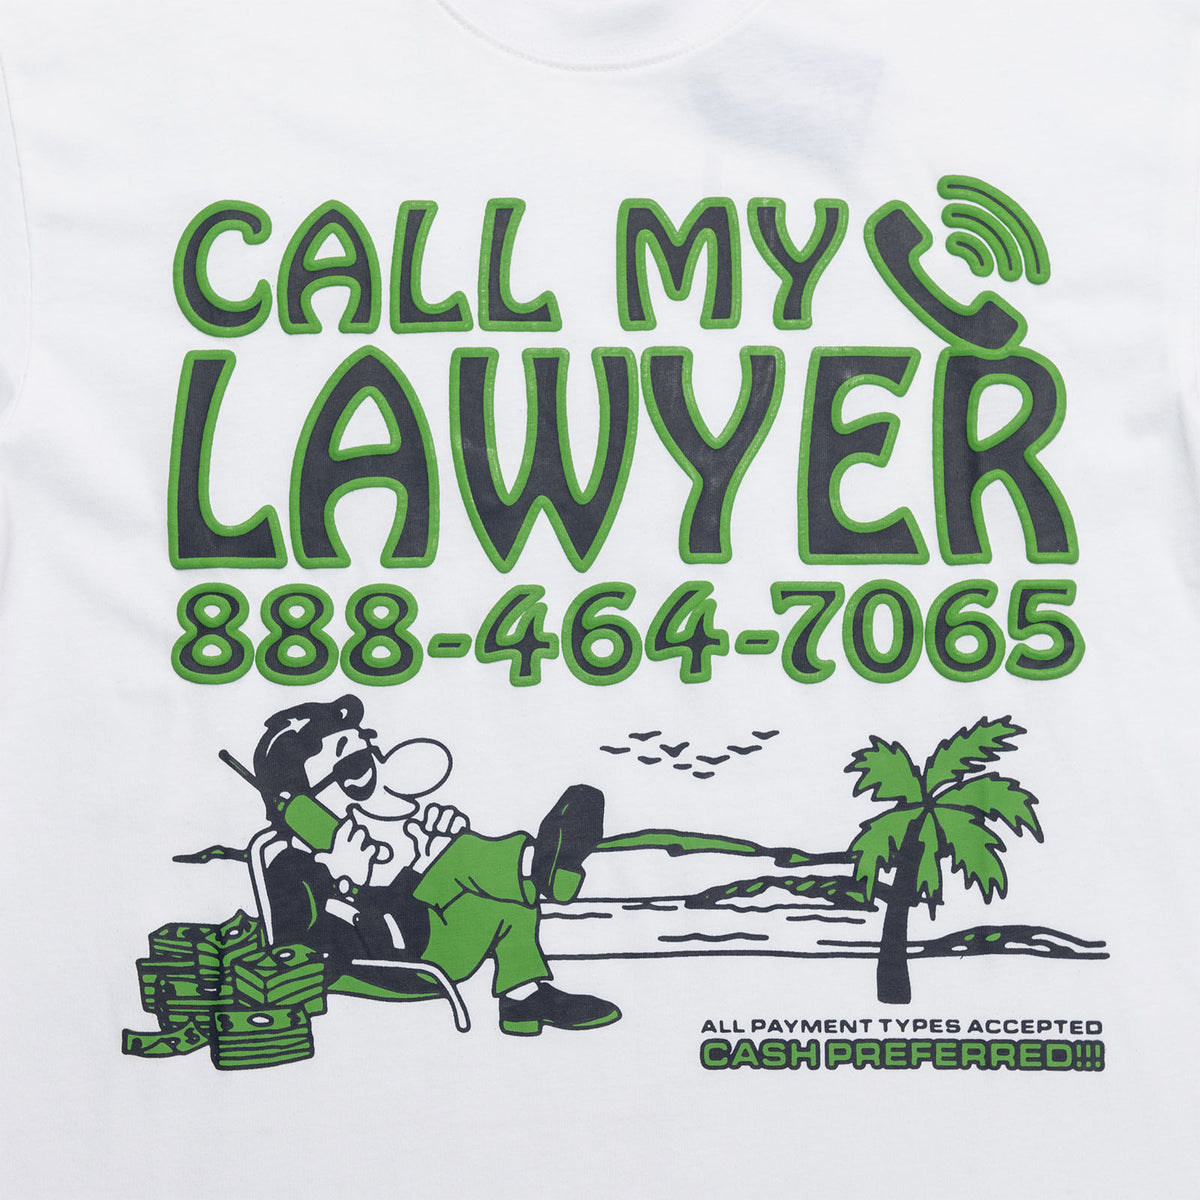 Offshore Lawyer T-Shirt - White